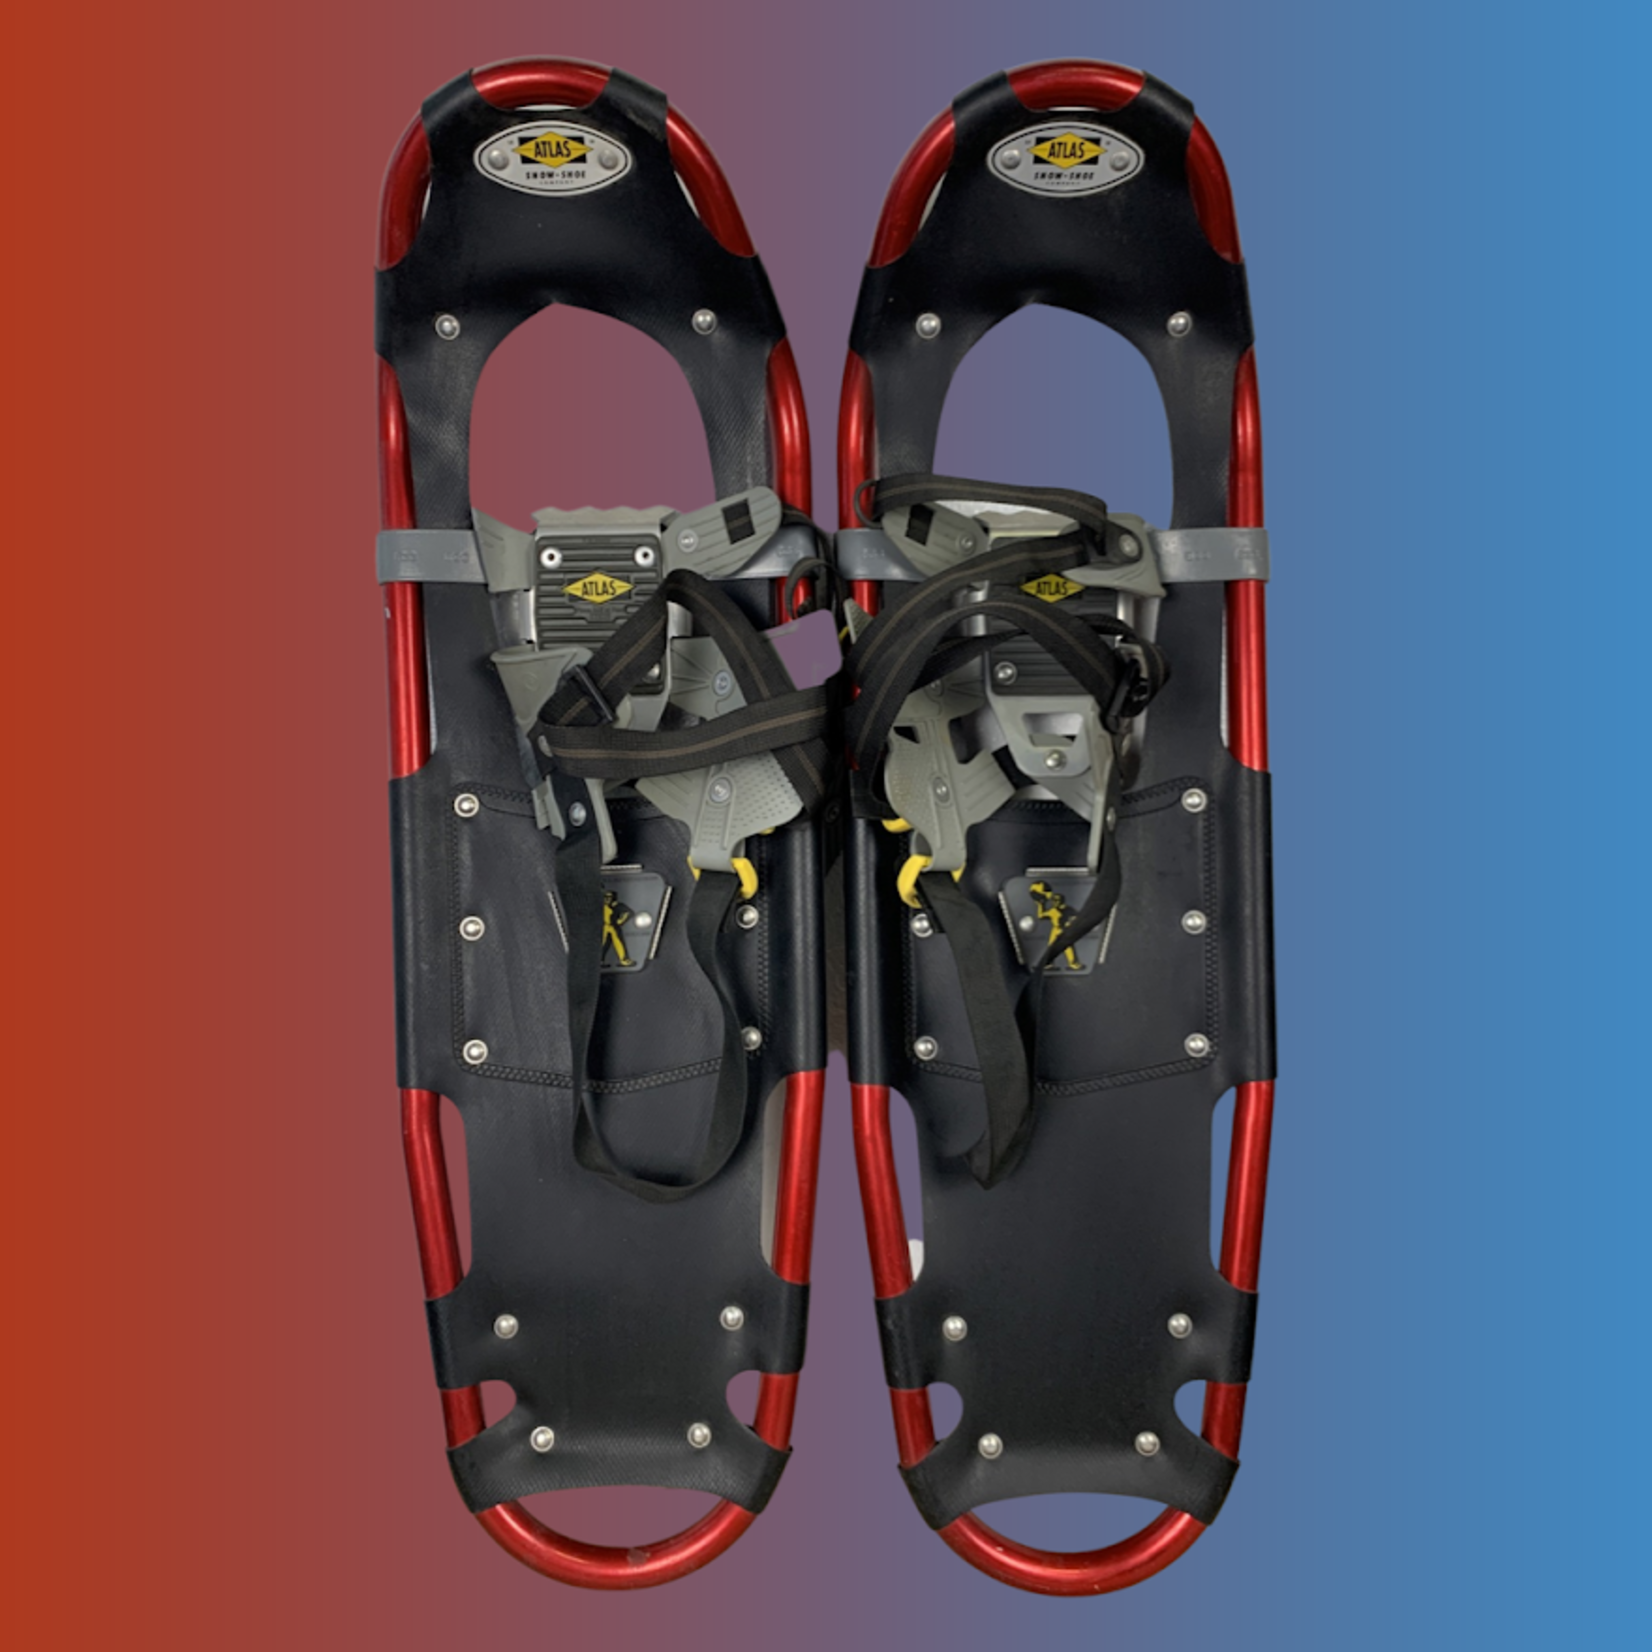 Atlas Atlas Snowshoes Hiking Series, 30 inches.